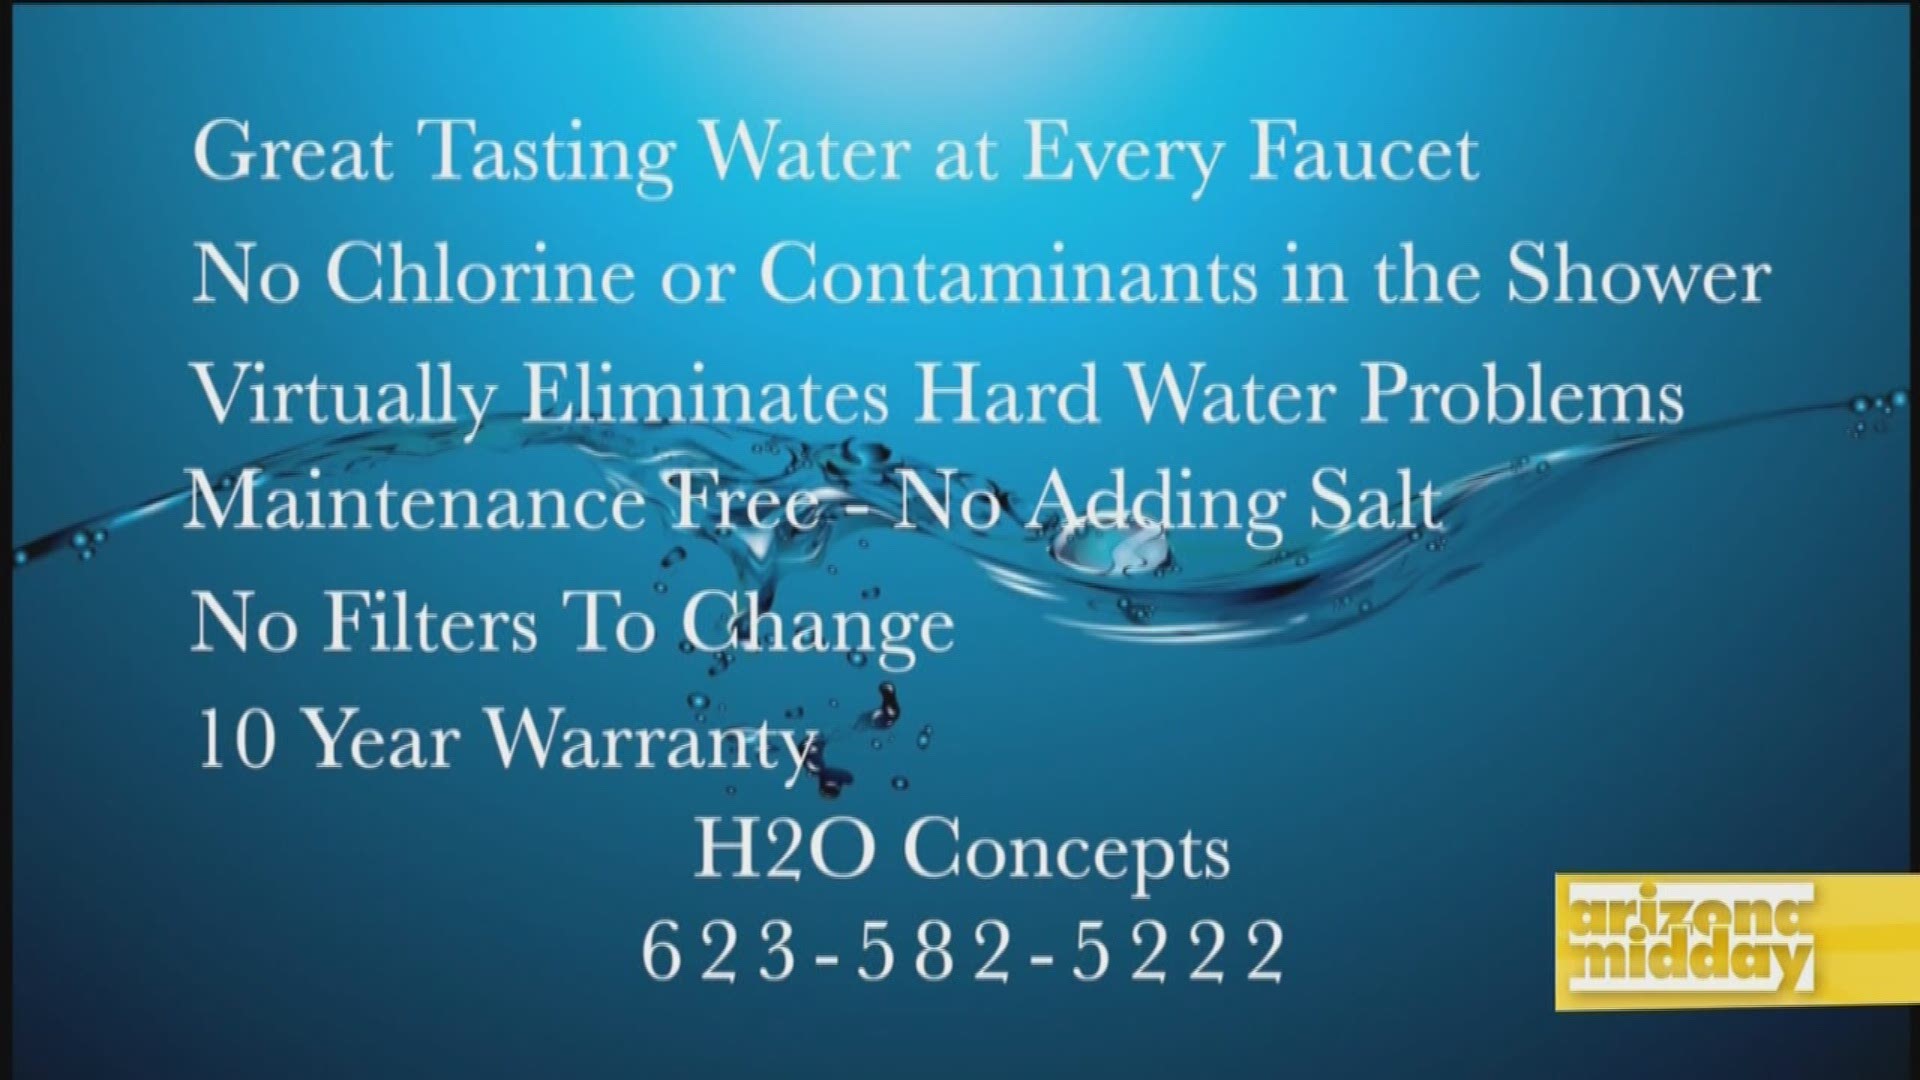 Derk Chamberlin from H20 Concepts fills us in on how to get better water quality at home